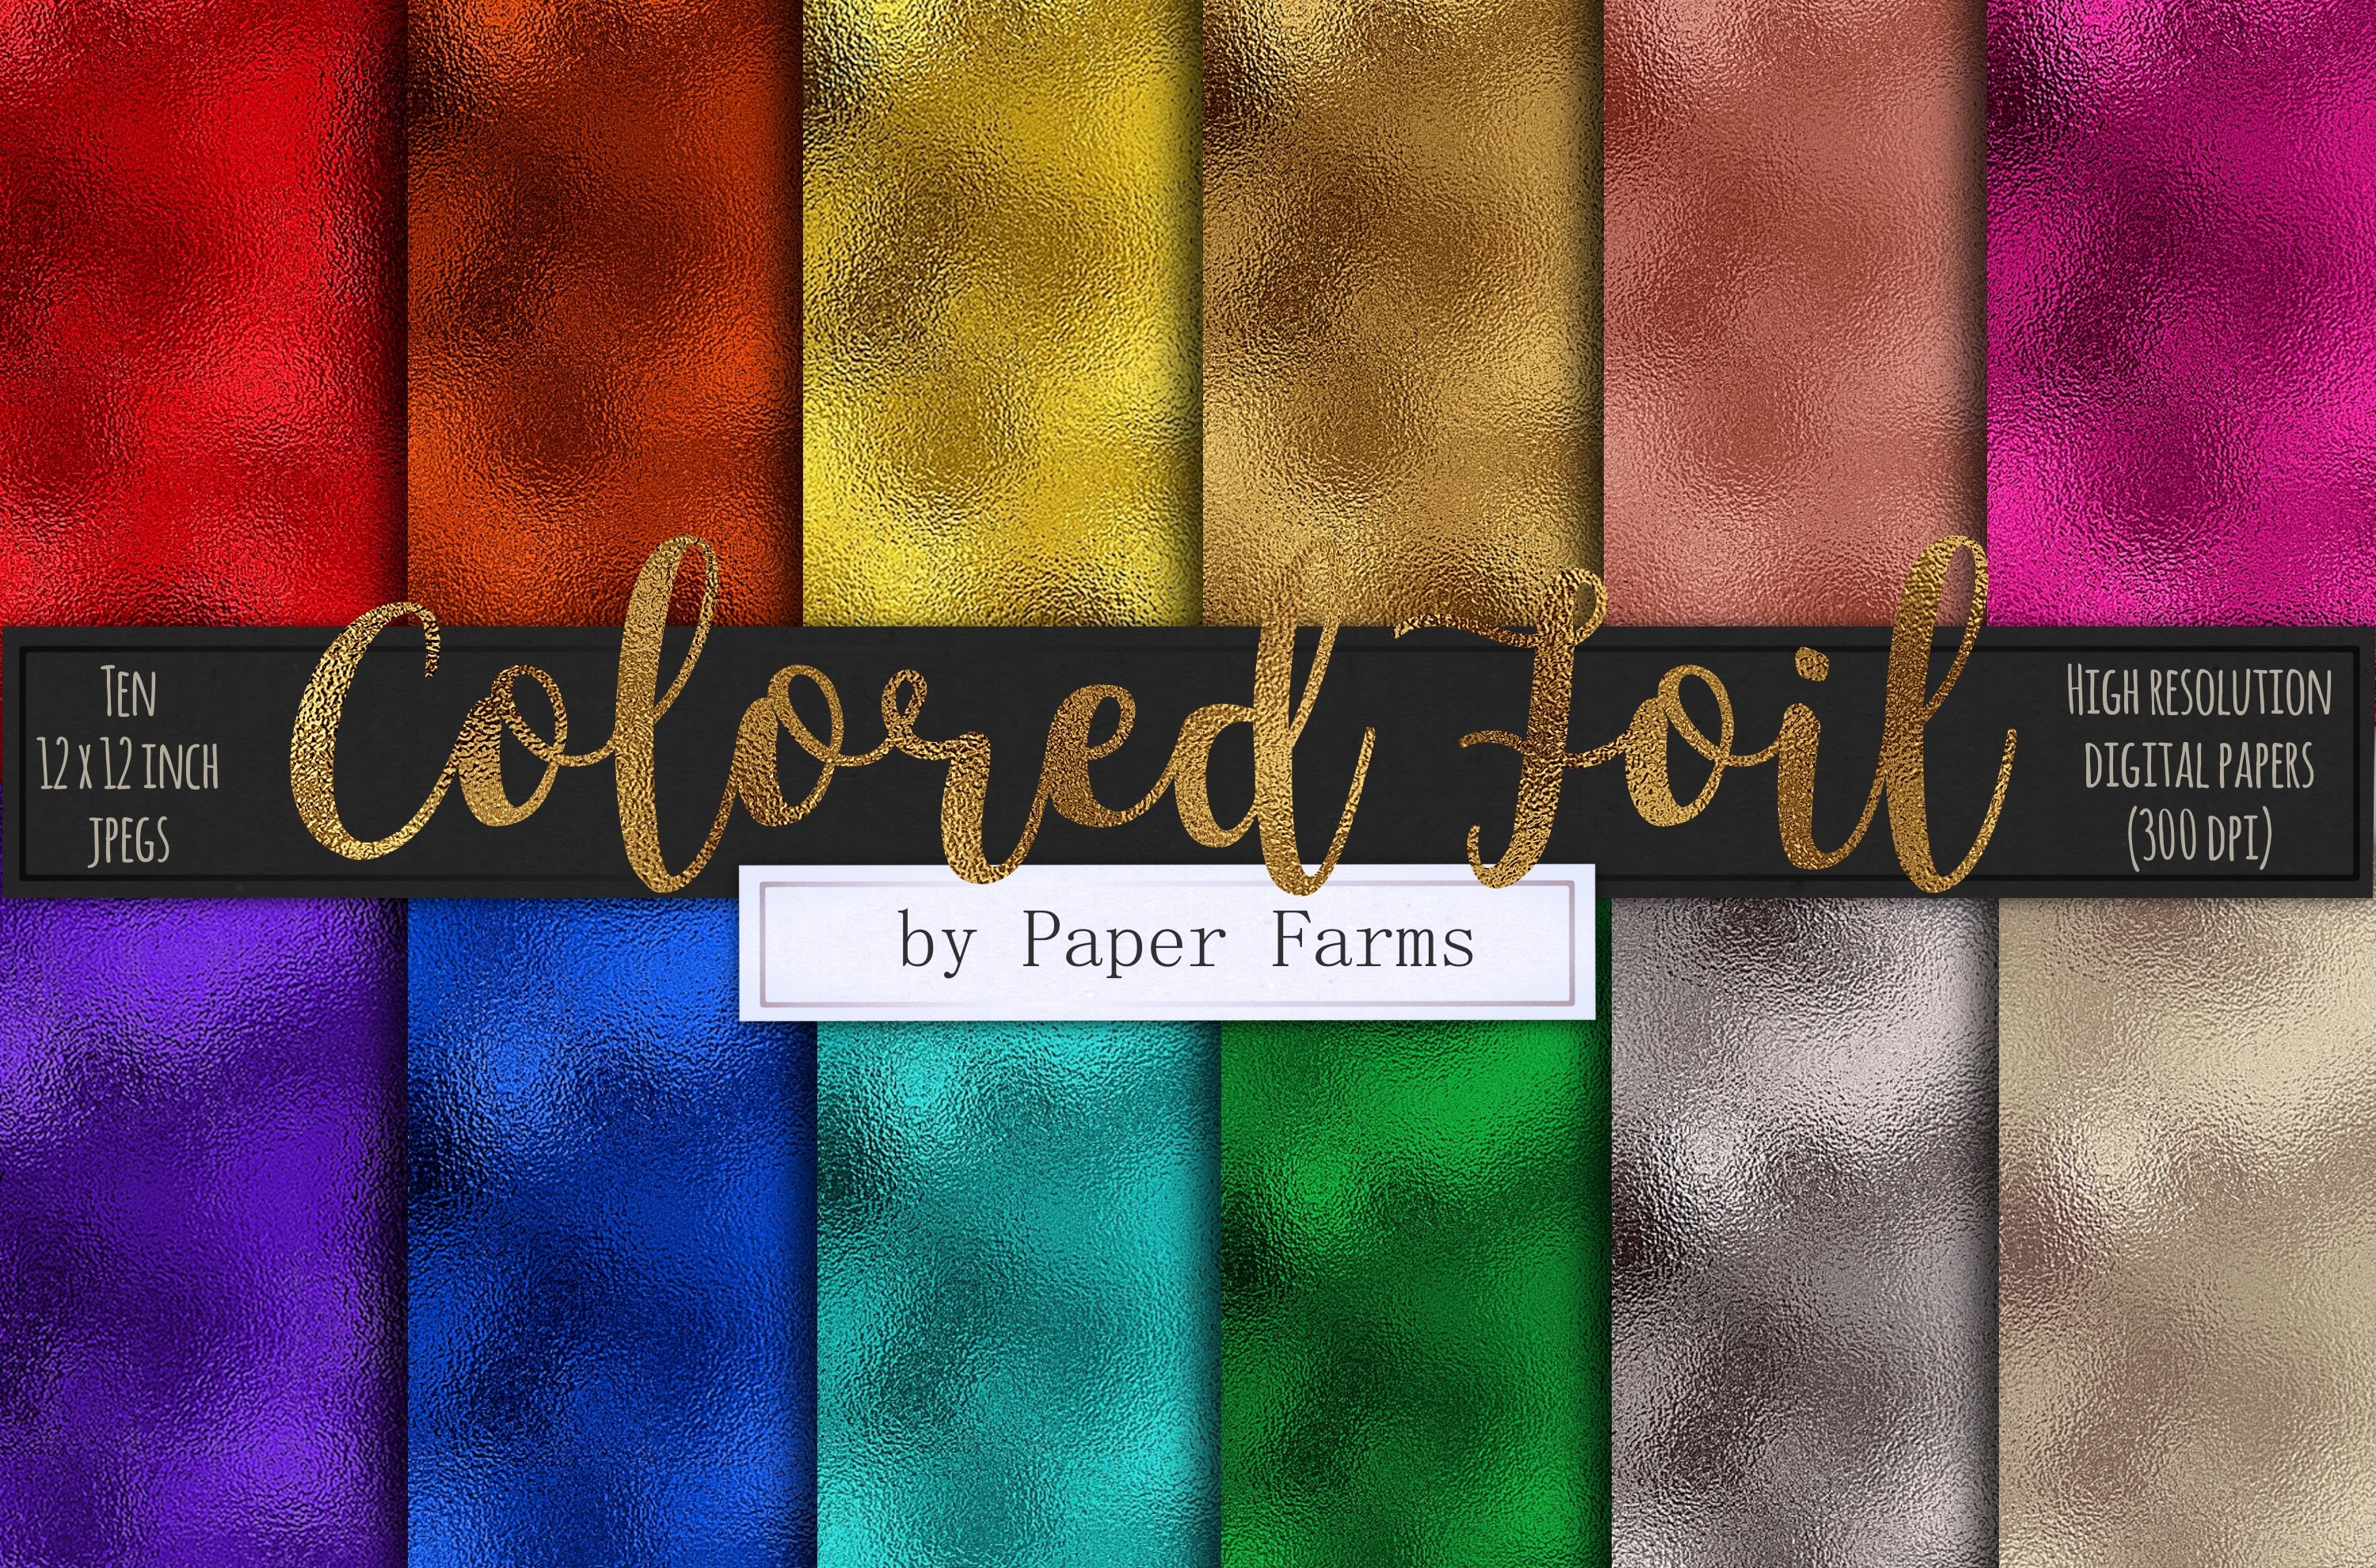 Colored foil textures cover image.